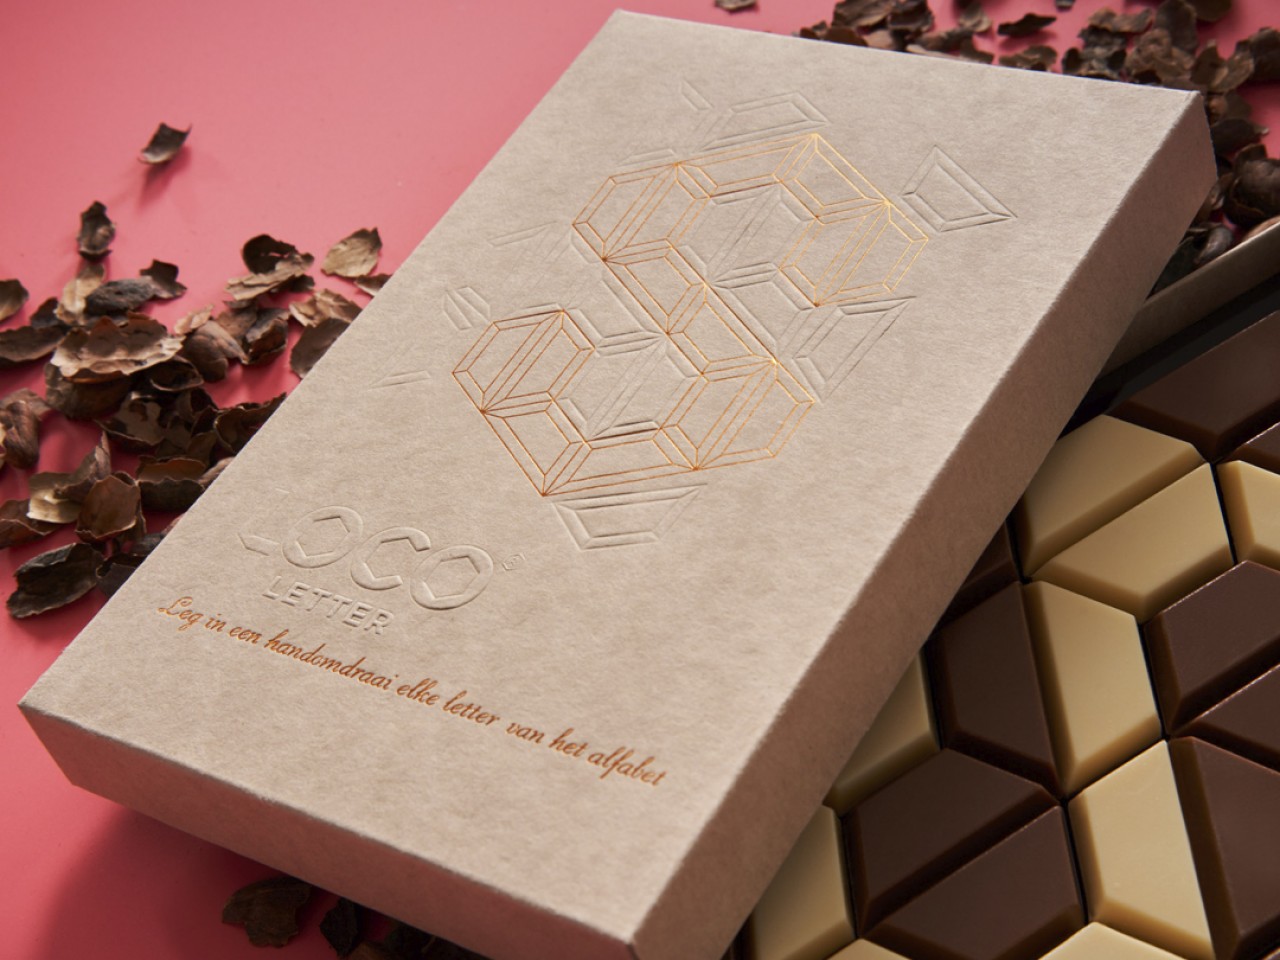 Loco Letter - Utilising waste materials to create a desirable and sustainable packaging design for premium chocolate.